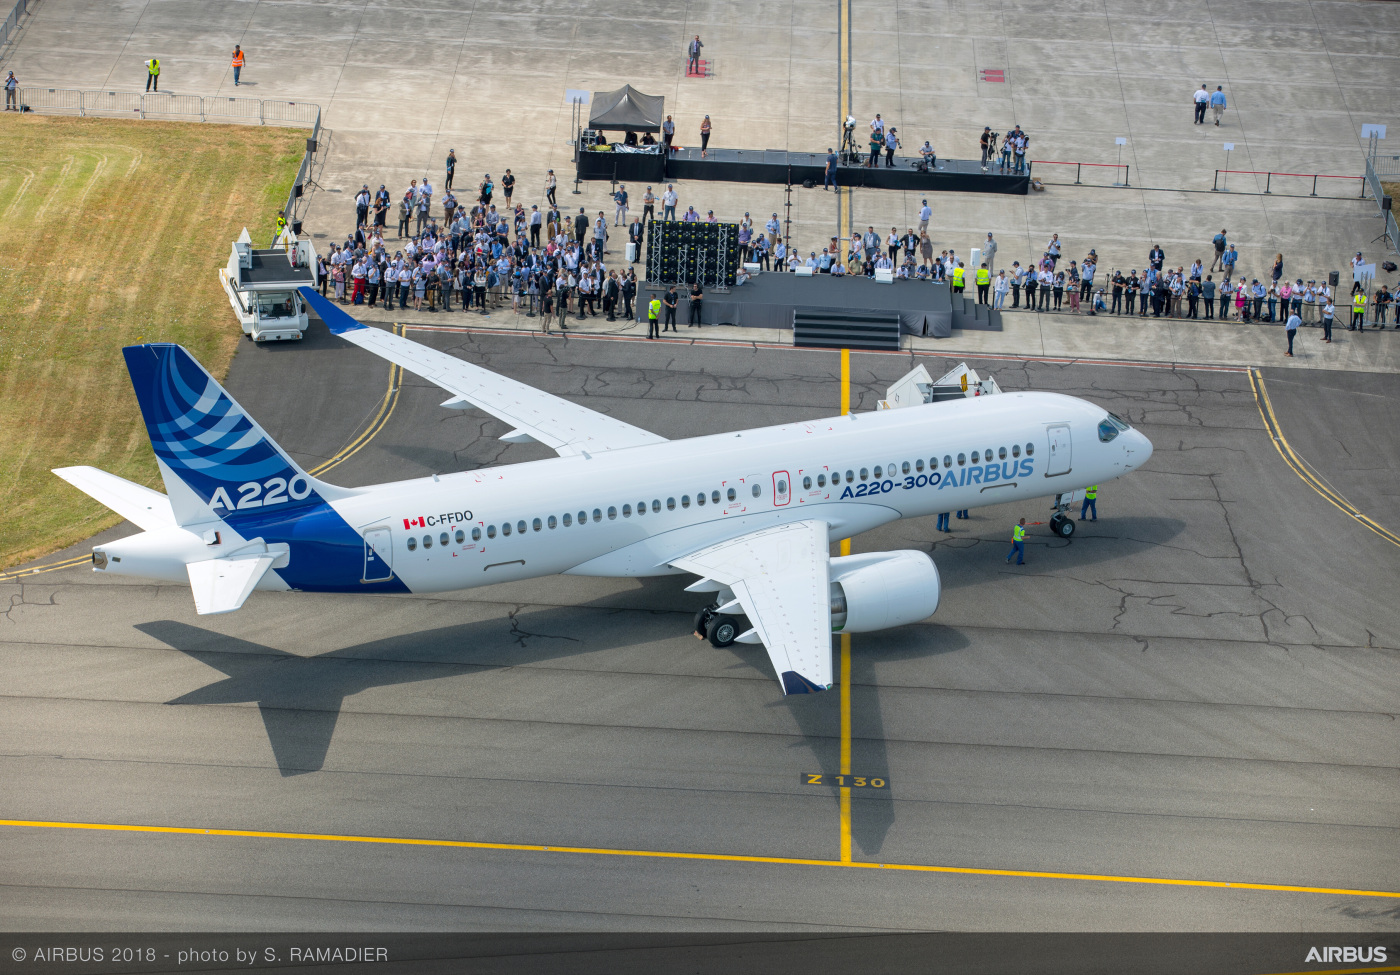 Airbus-A220-300-new-member-of-the-airbus-single-aisle-family-landing-063